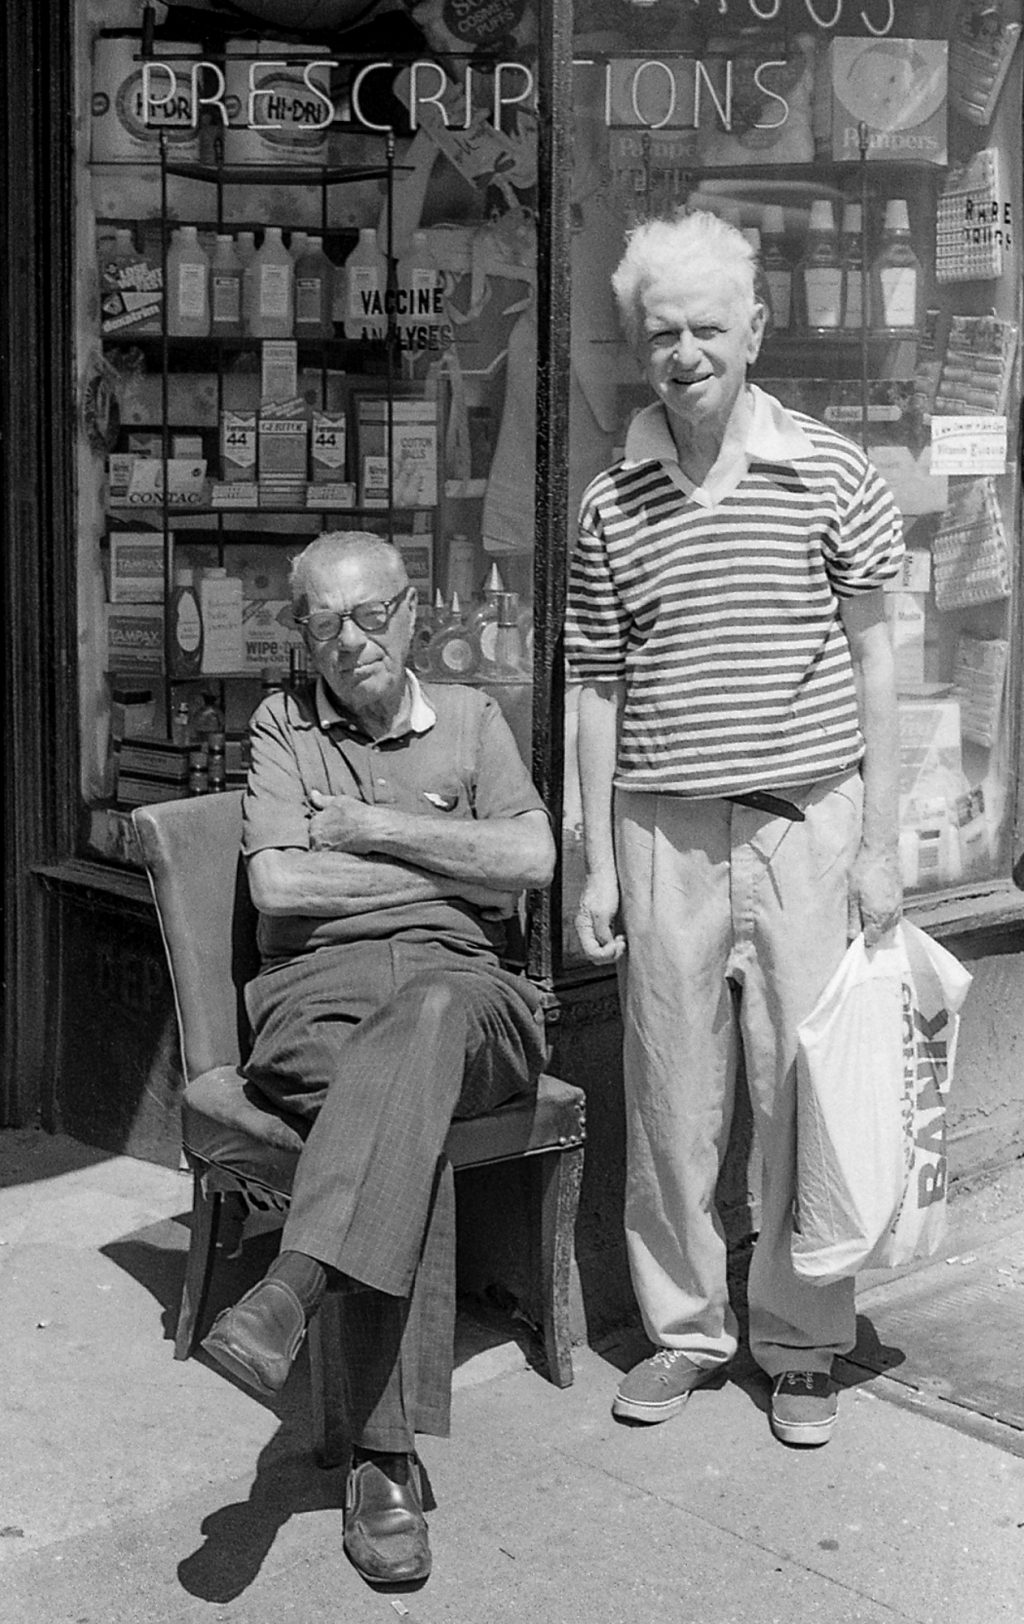 B&W Barbara Ehlers photograph of owner and friend outside of 255 West 105th Street